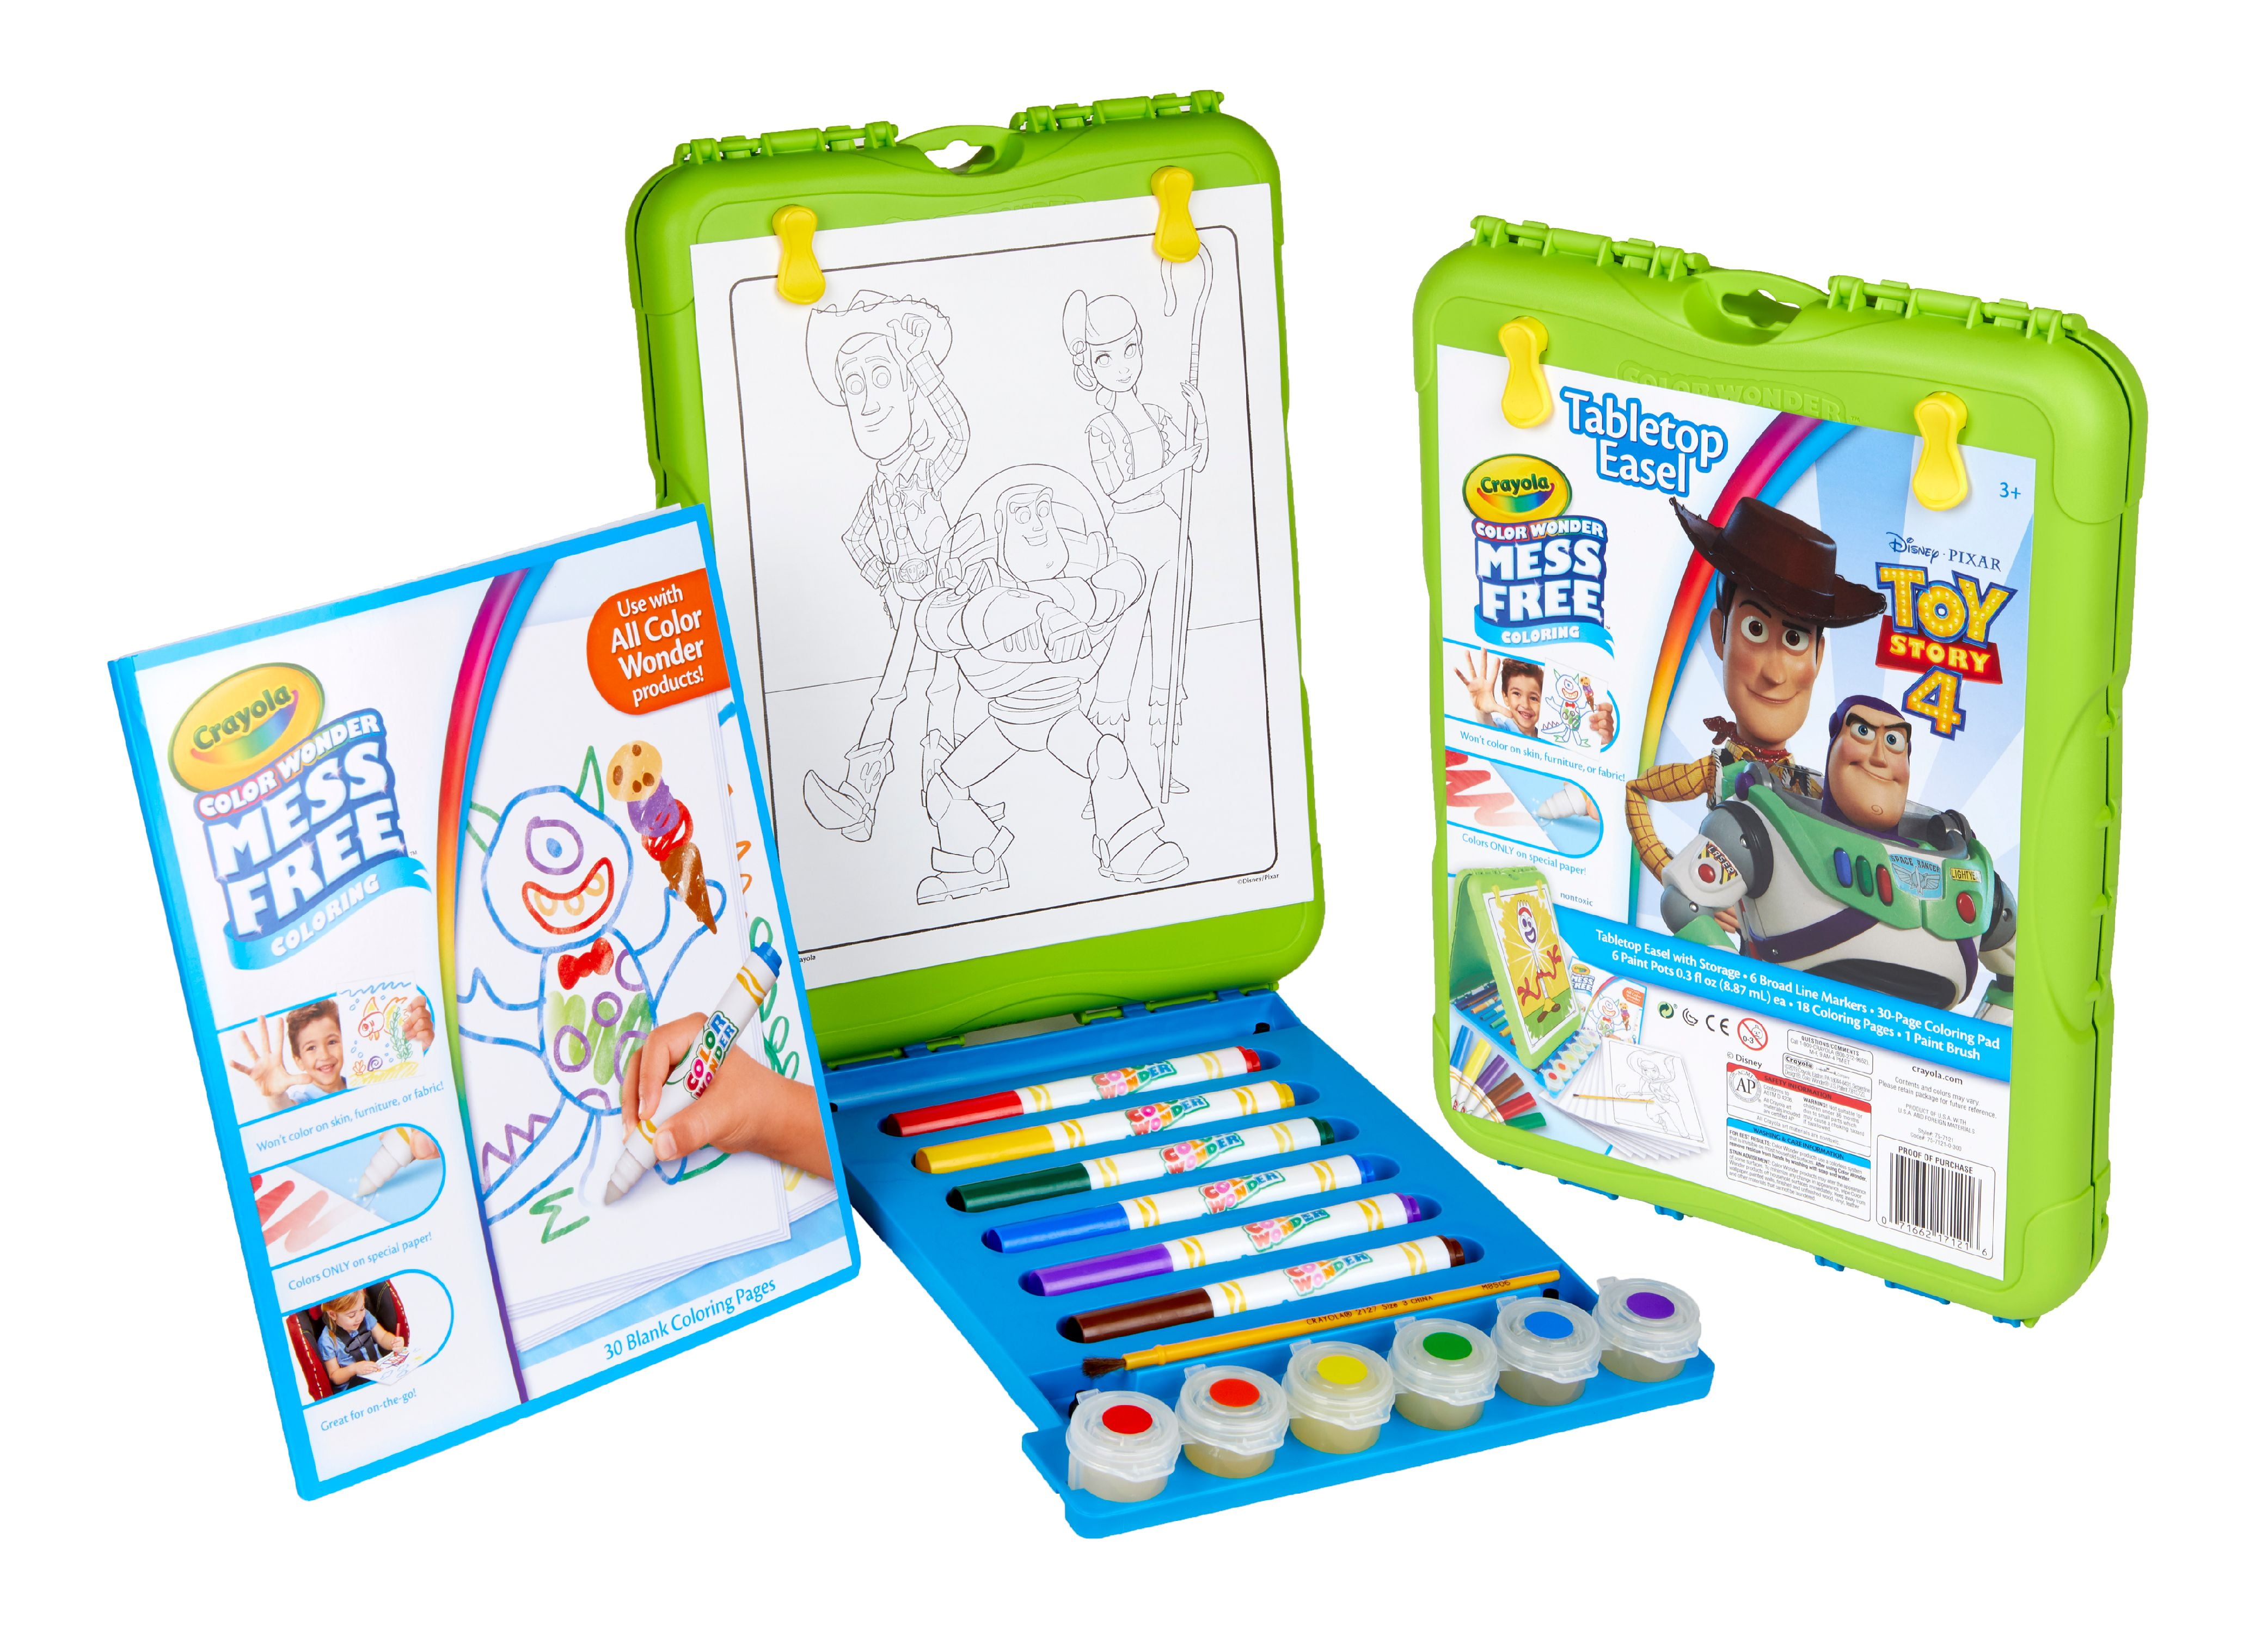 Crayola Color wonder Toy Story 4 Travel Easel With 30 pages markers and paints 